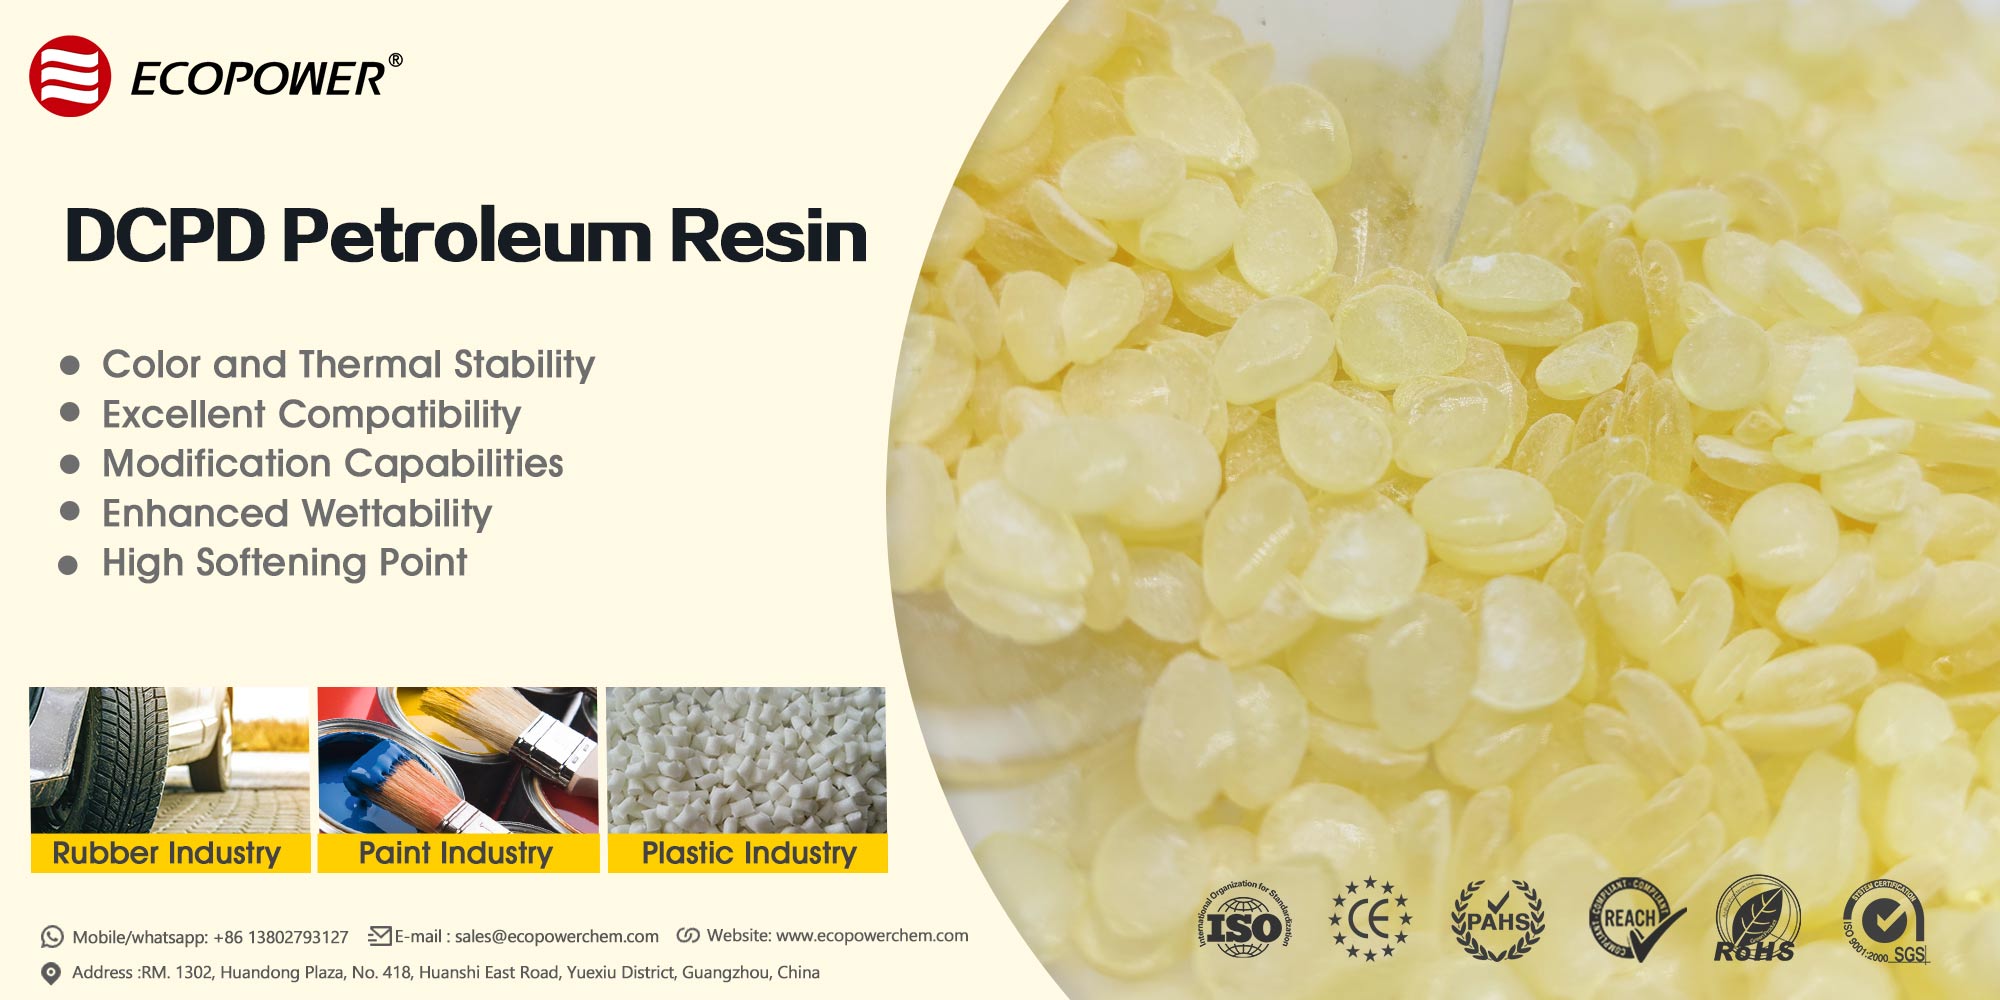 Introduction to DCPD Petroleum Resin and Applications